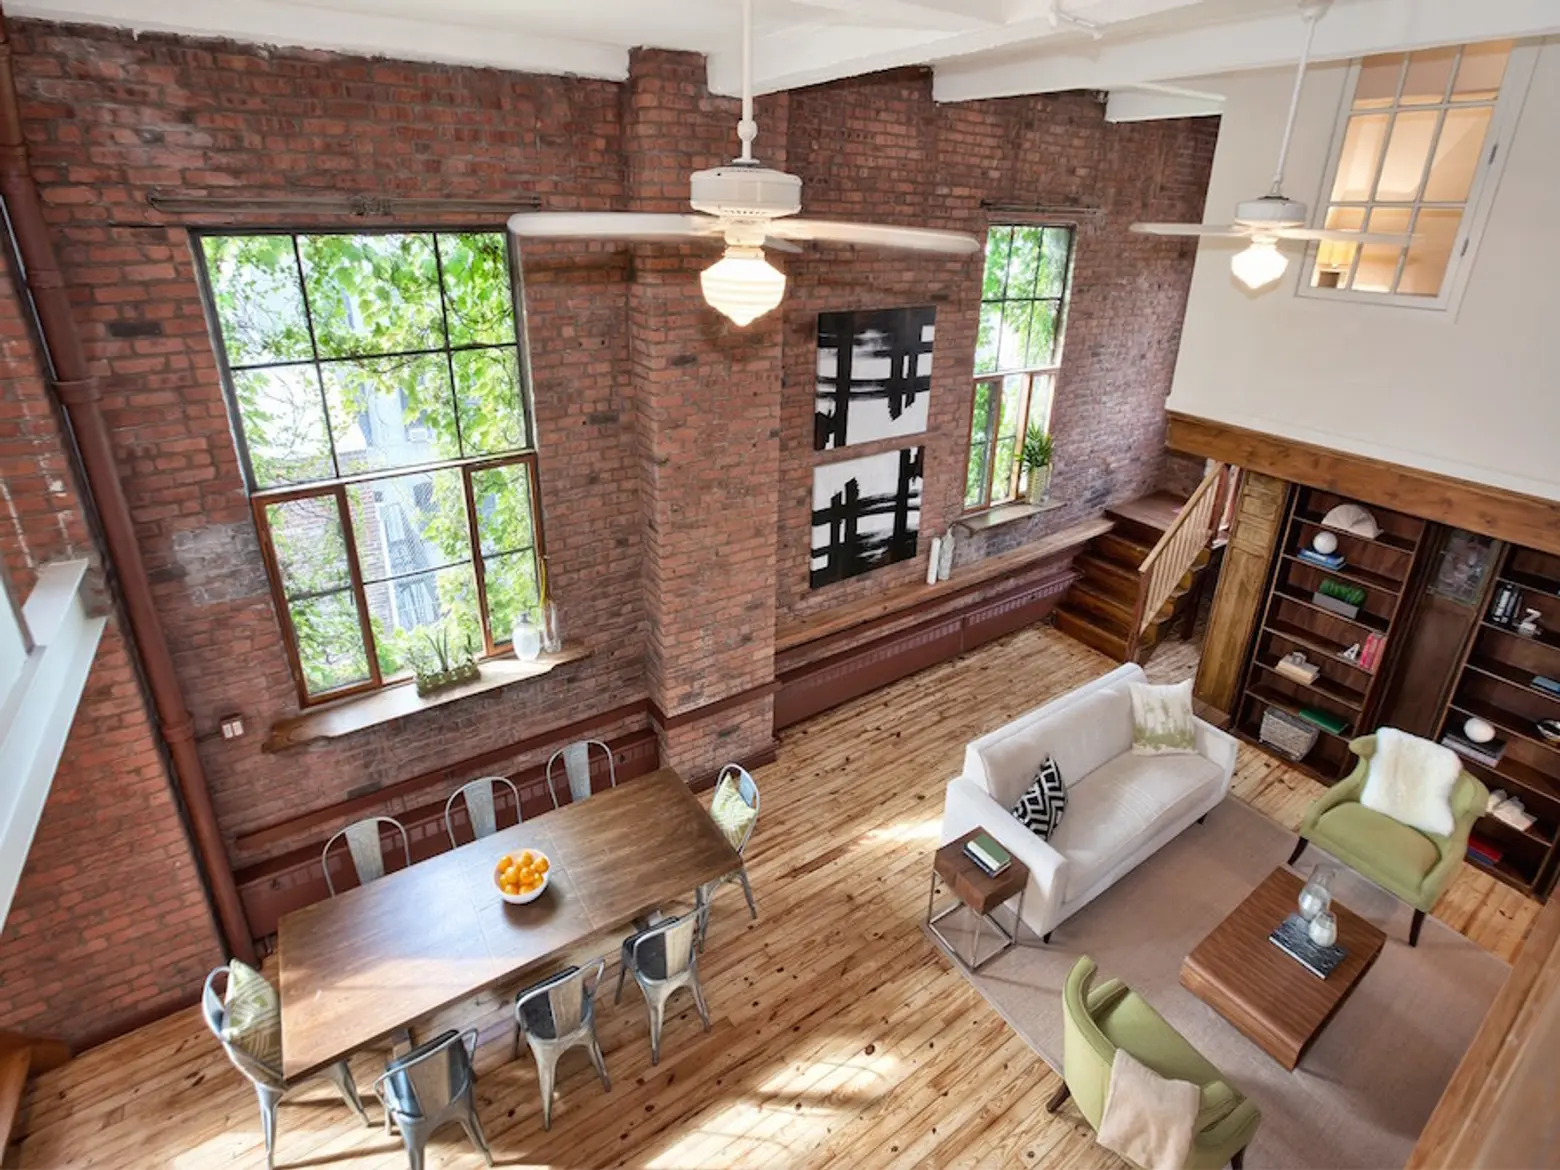 Find Your Favorite Spaces in This Flexible South Slope Loft Duplex